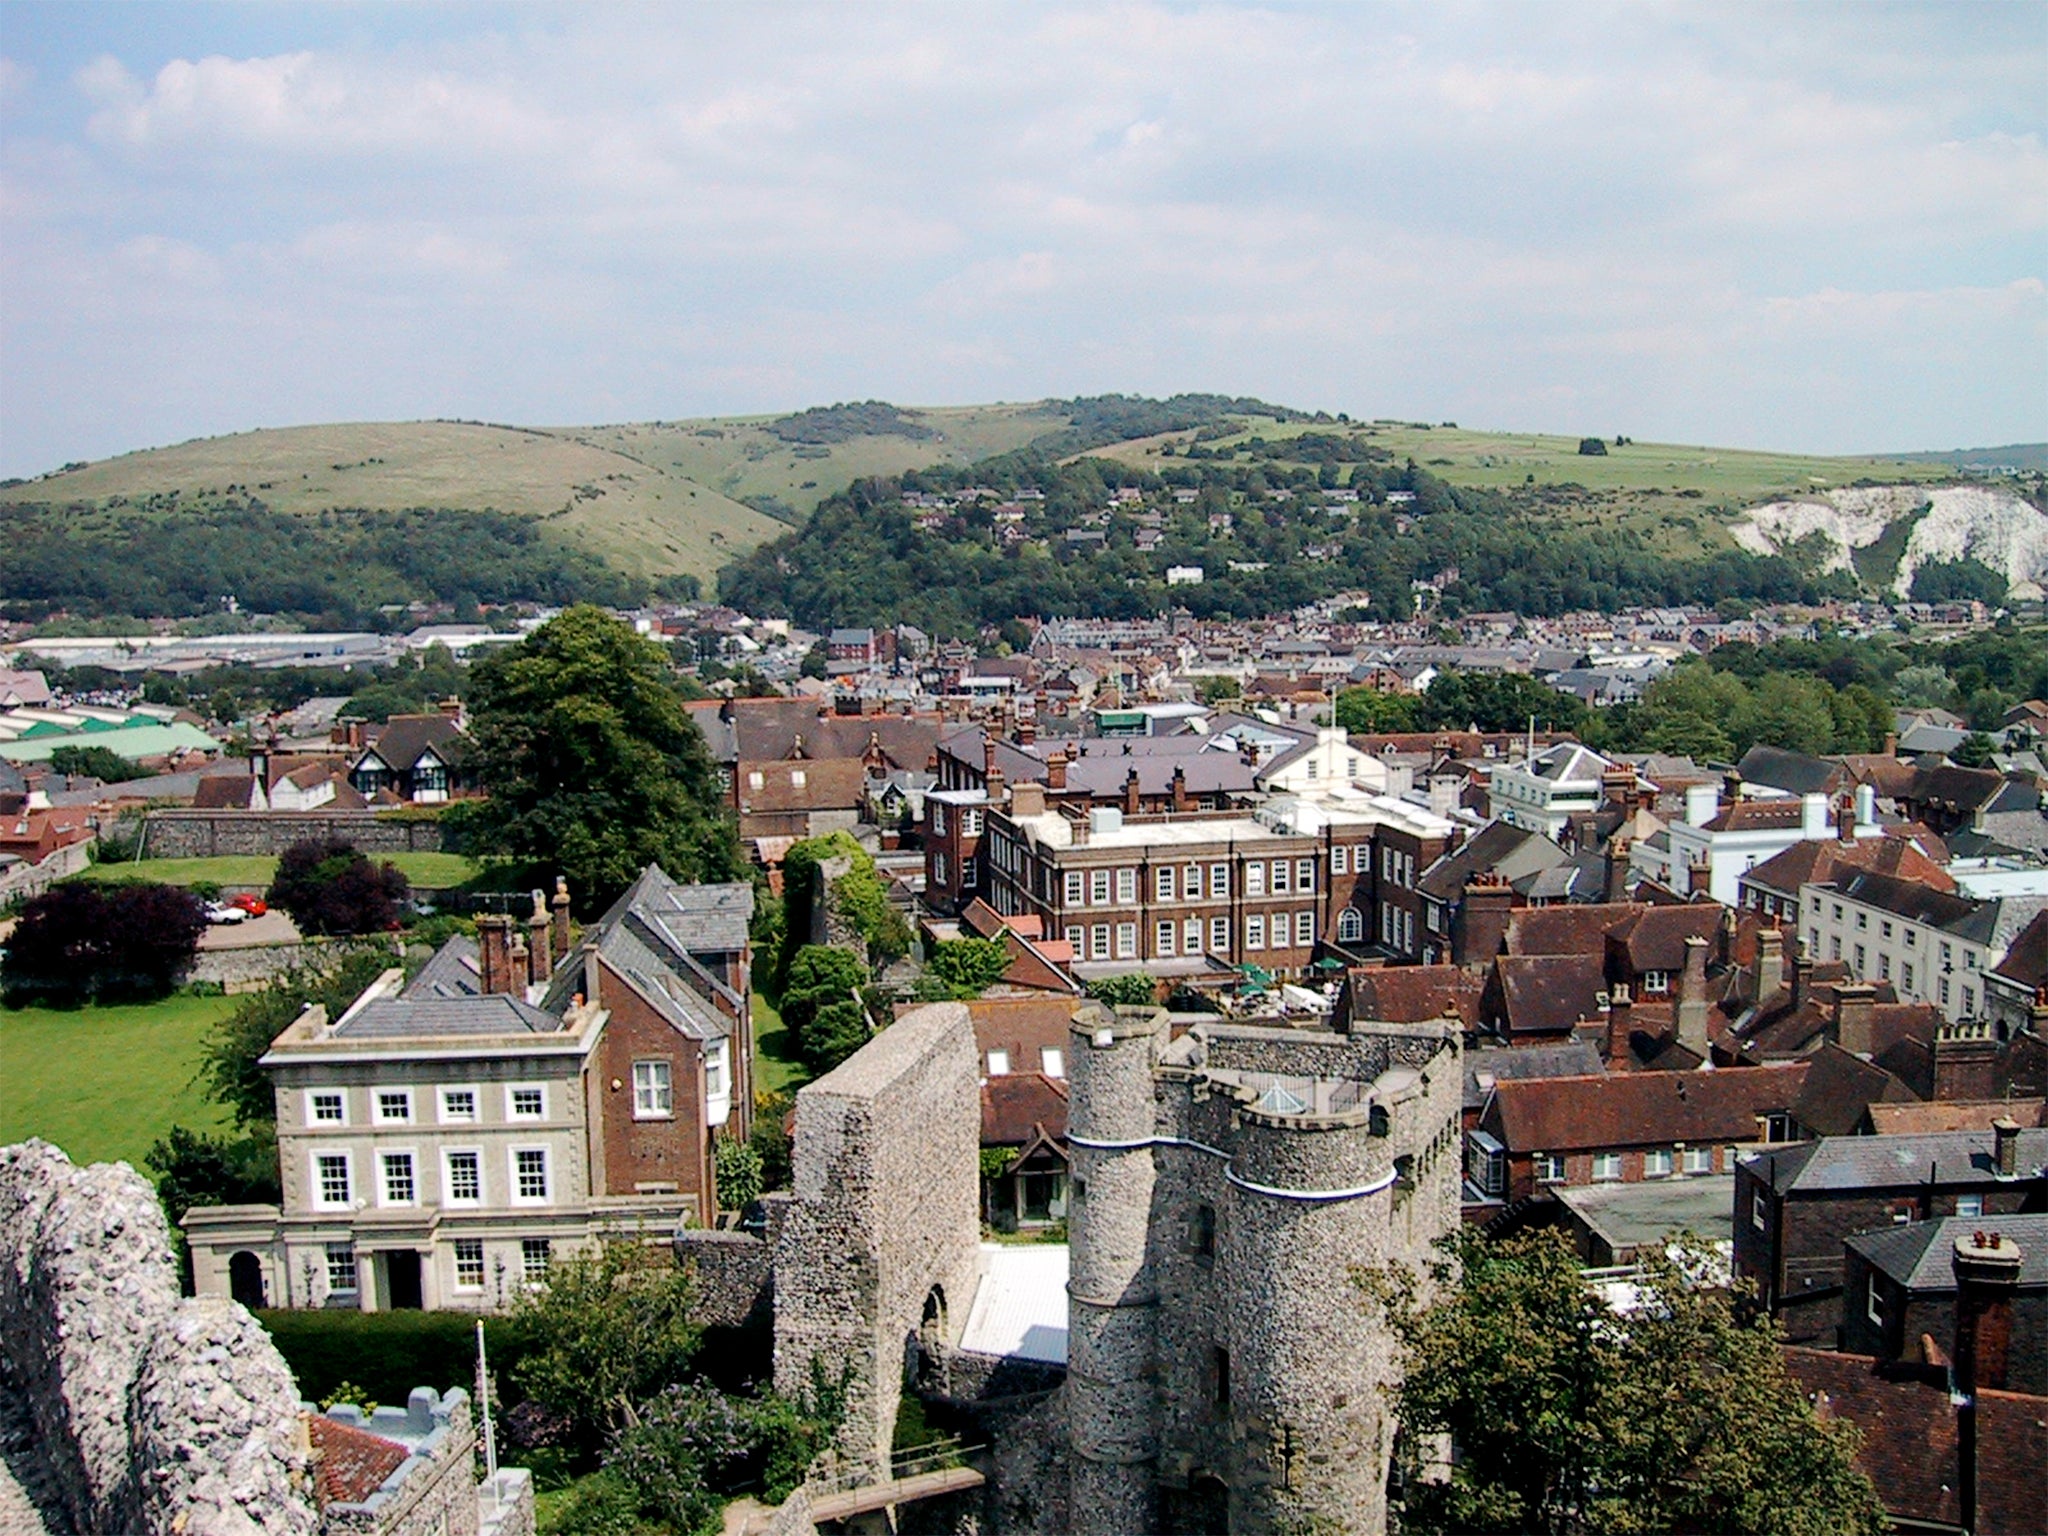 View of Lewes, Sussex from Lewes castle